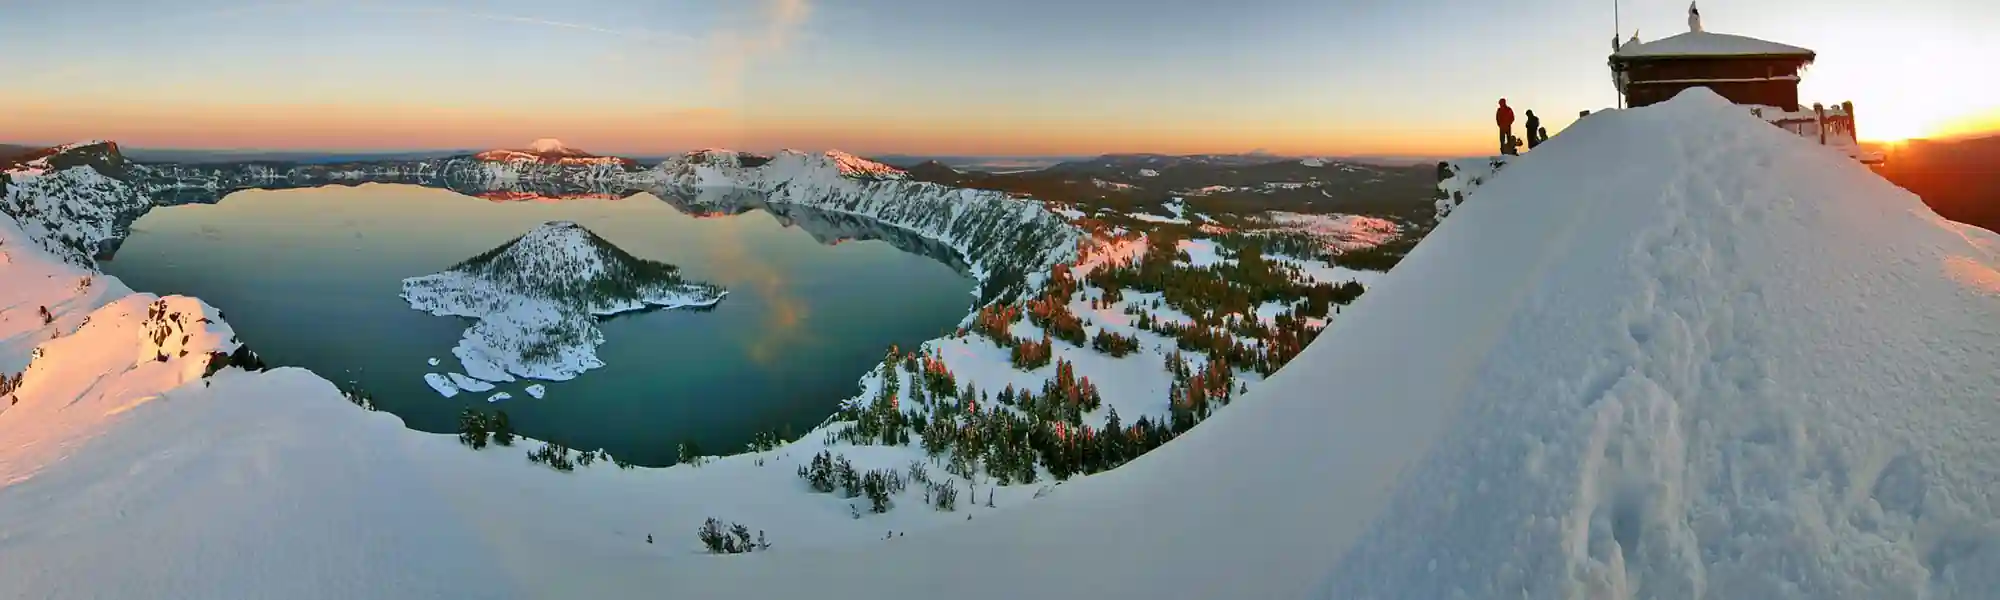 Bus tickets to Crater Lake